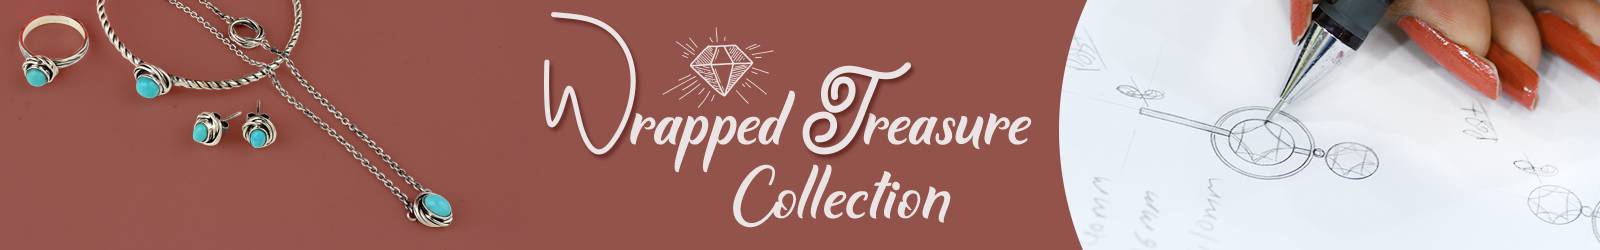 Wrapped Treasure Jewellery Collection